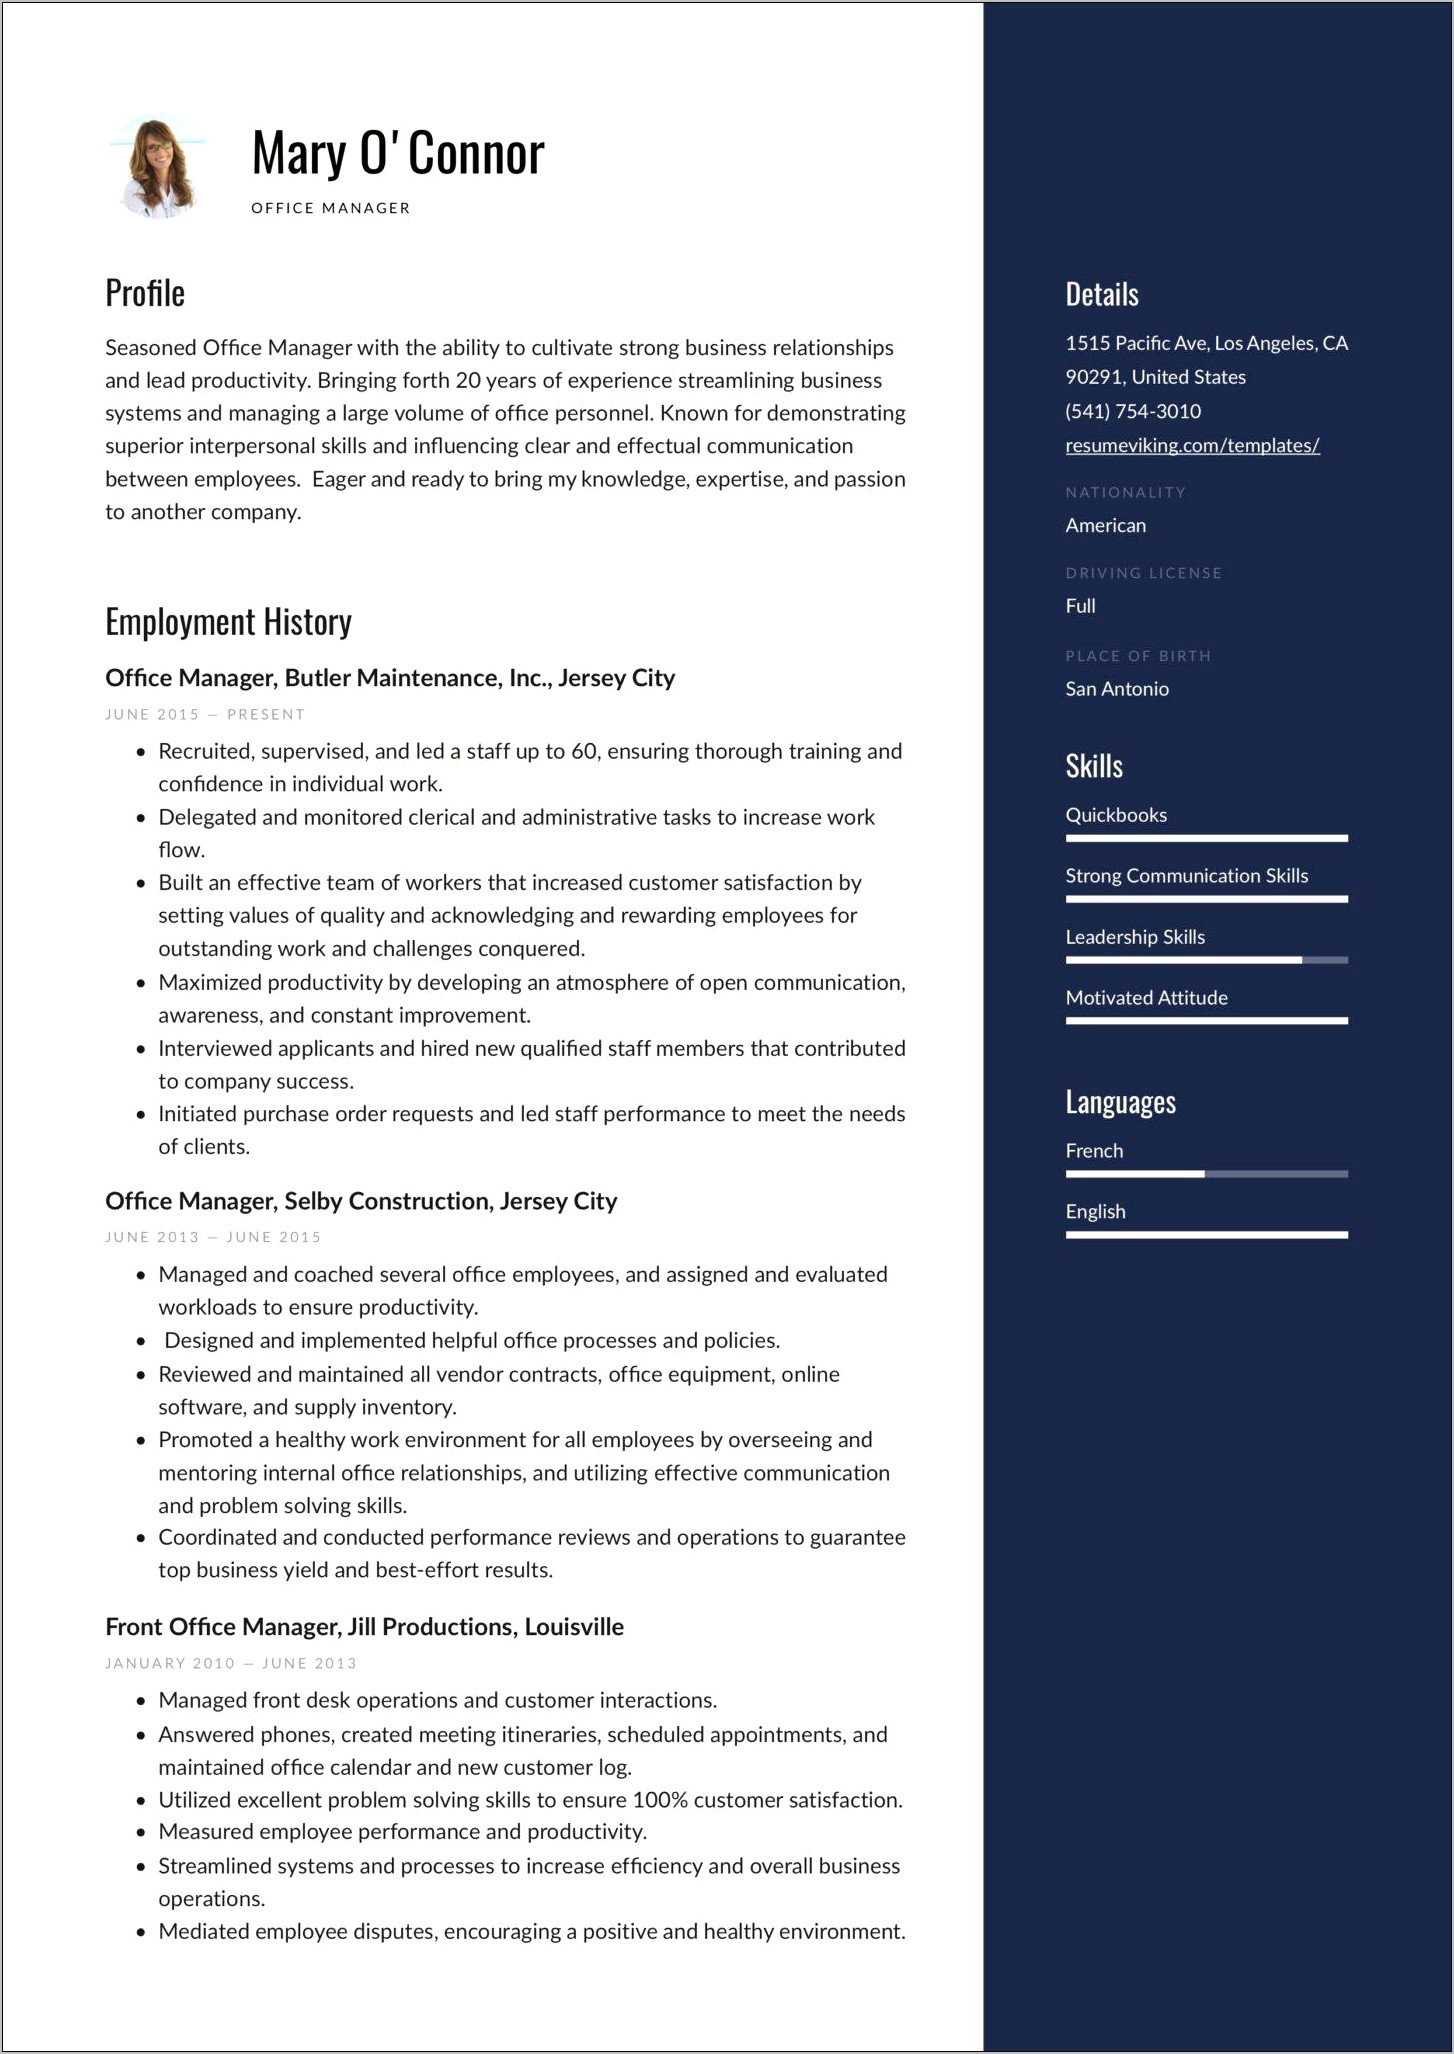 Office Manager Professional Summary Resume